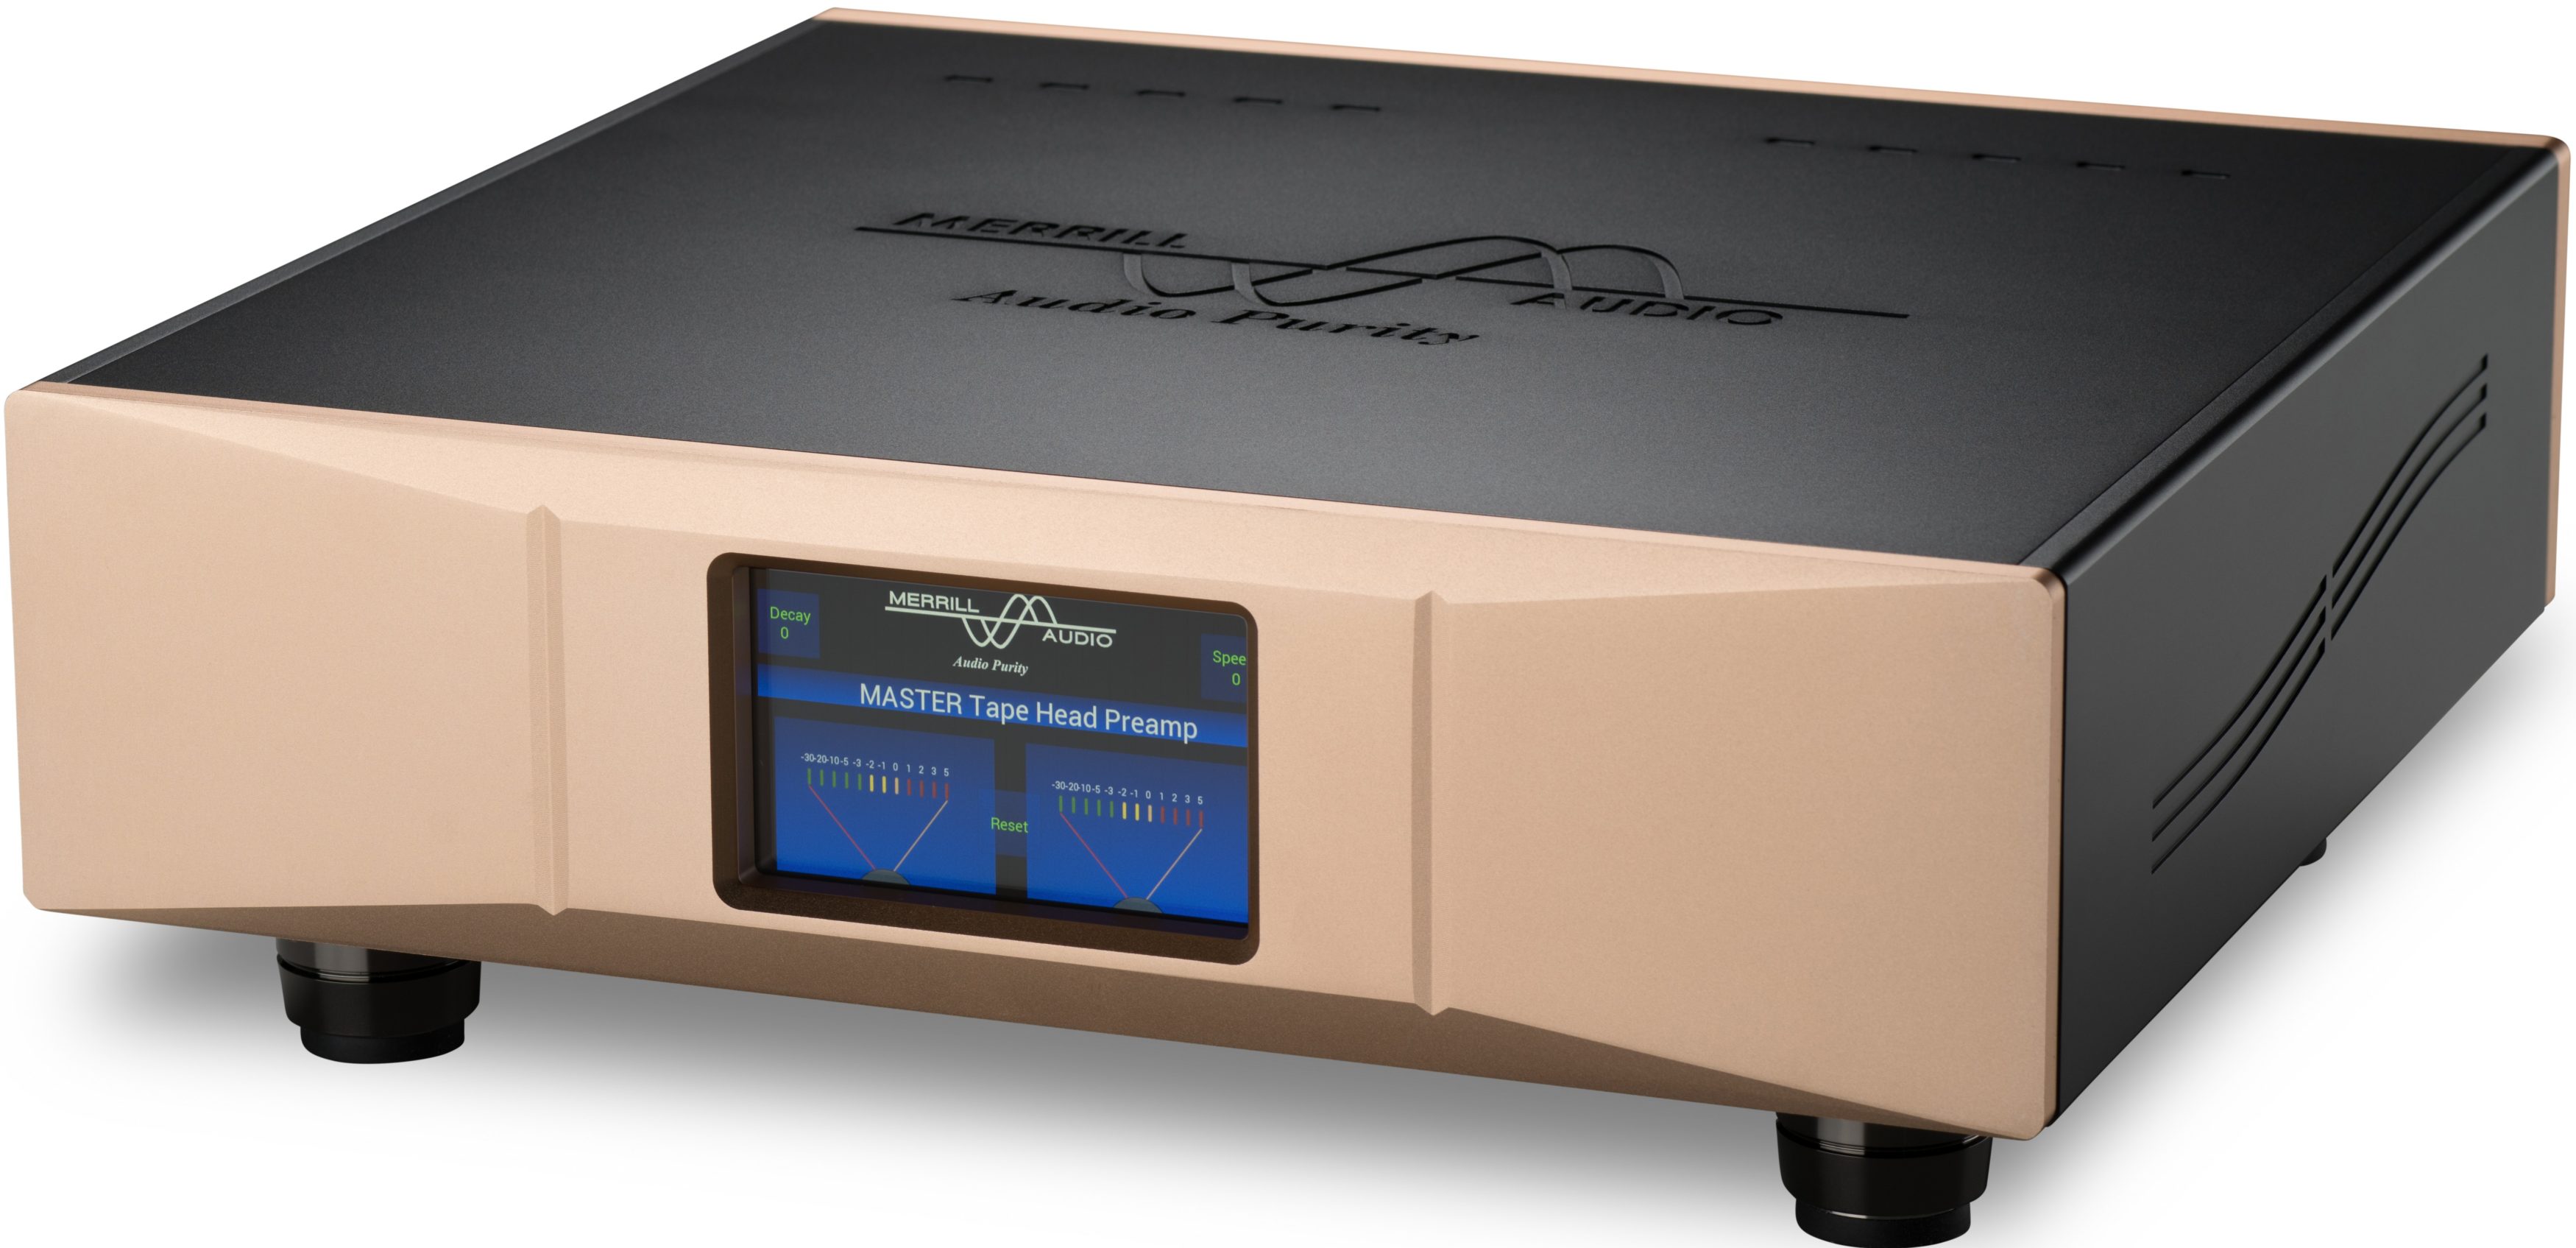 Merrill Audio announces MASTER Tape Head Preamplifier for Reel to